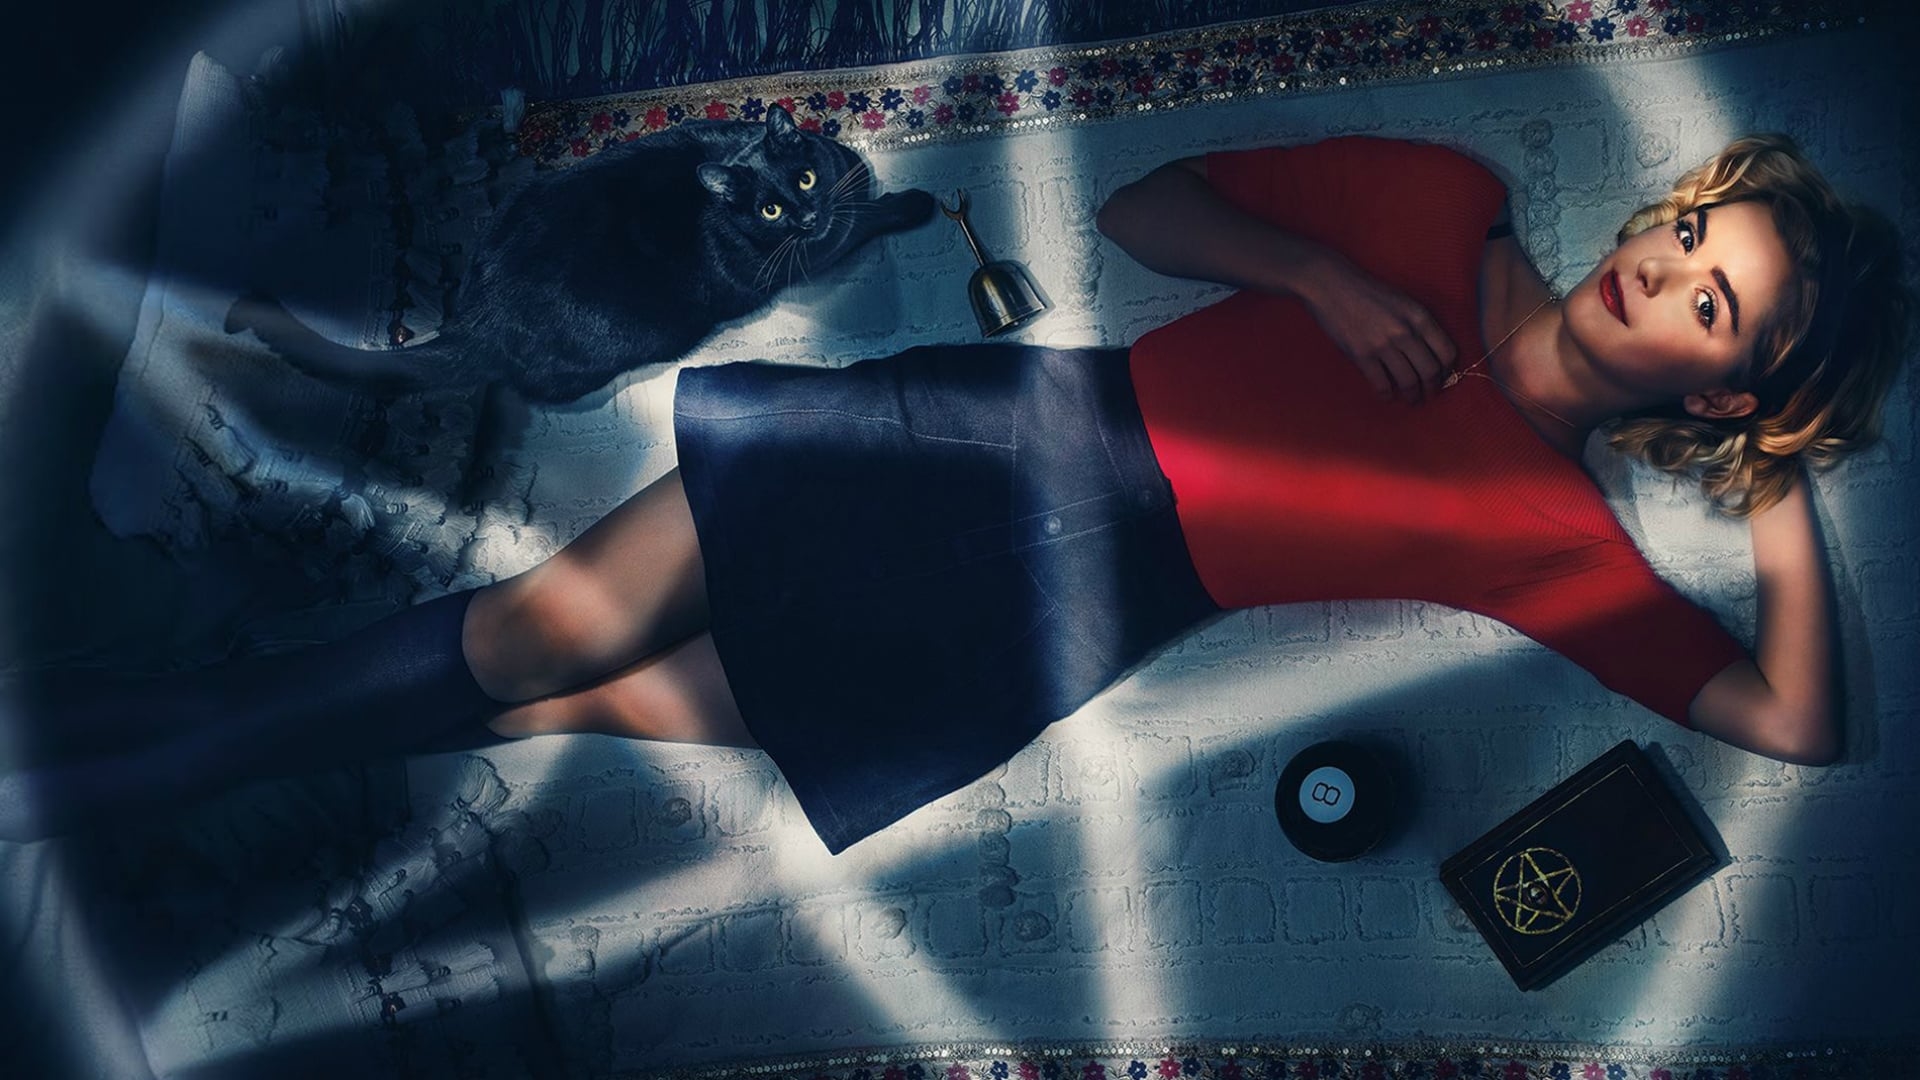 People 1920x1080 Sabrina Spellman cats lying on back looking at viewer blonde black cats red clothing red lipstick TV series Netflix TV Series women celebrity actress legs crossed indoors hand(s) on chest witch women indoors makeup wavy hair Kiernan Shipka Chilling Adventures of Sabrina legs together